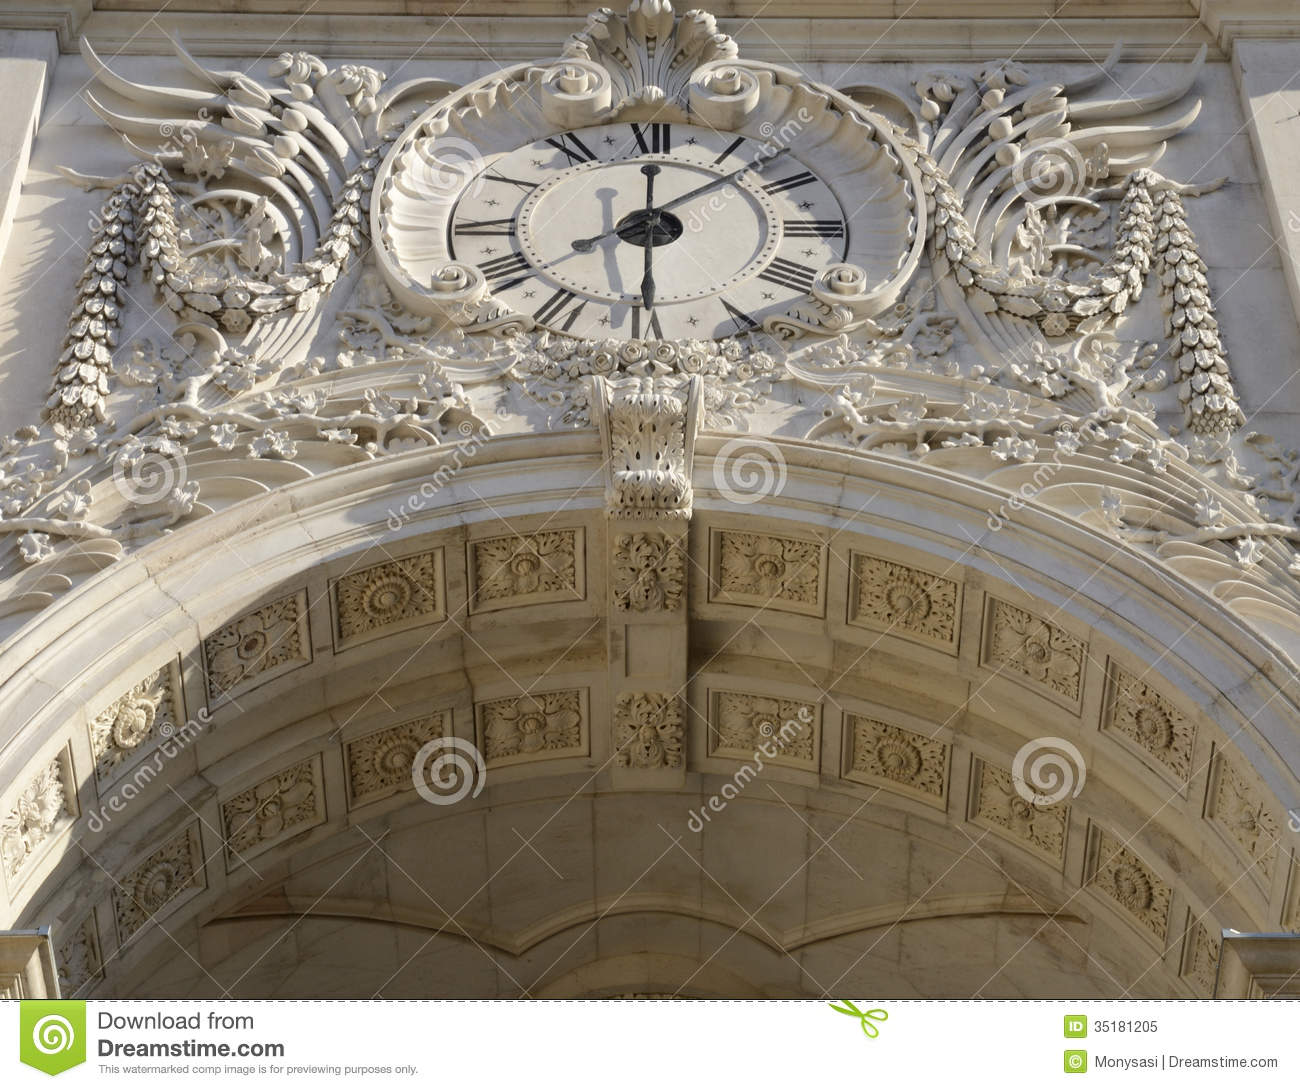 Arch In Merce Square Lisbonportugal HD Walls Find Wallpaper